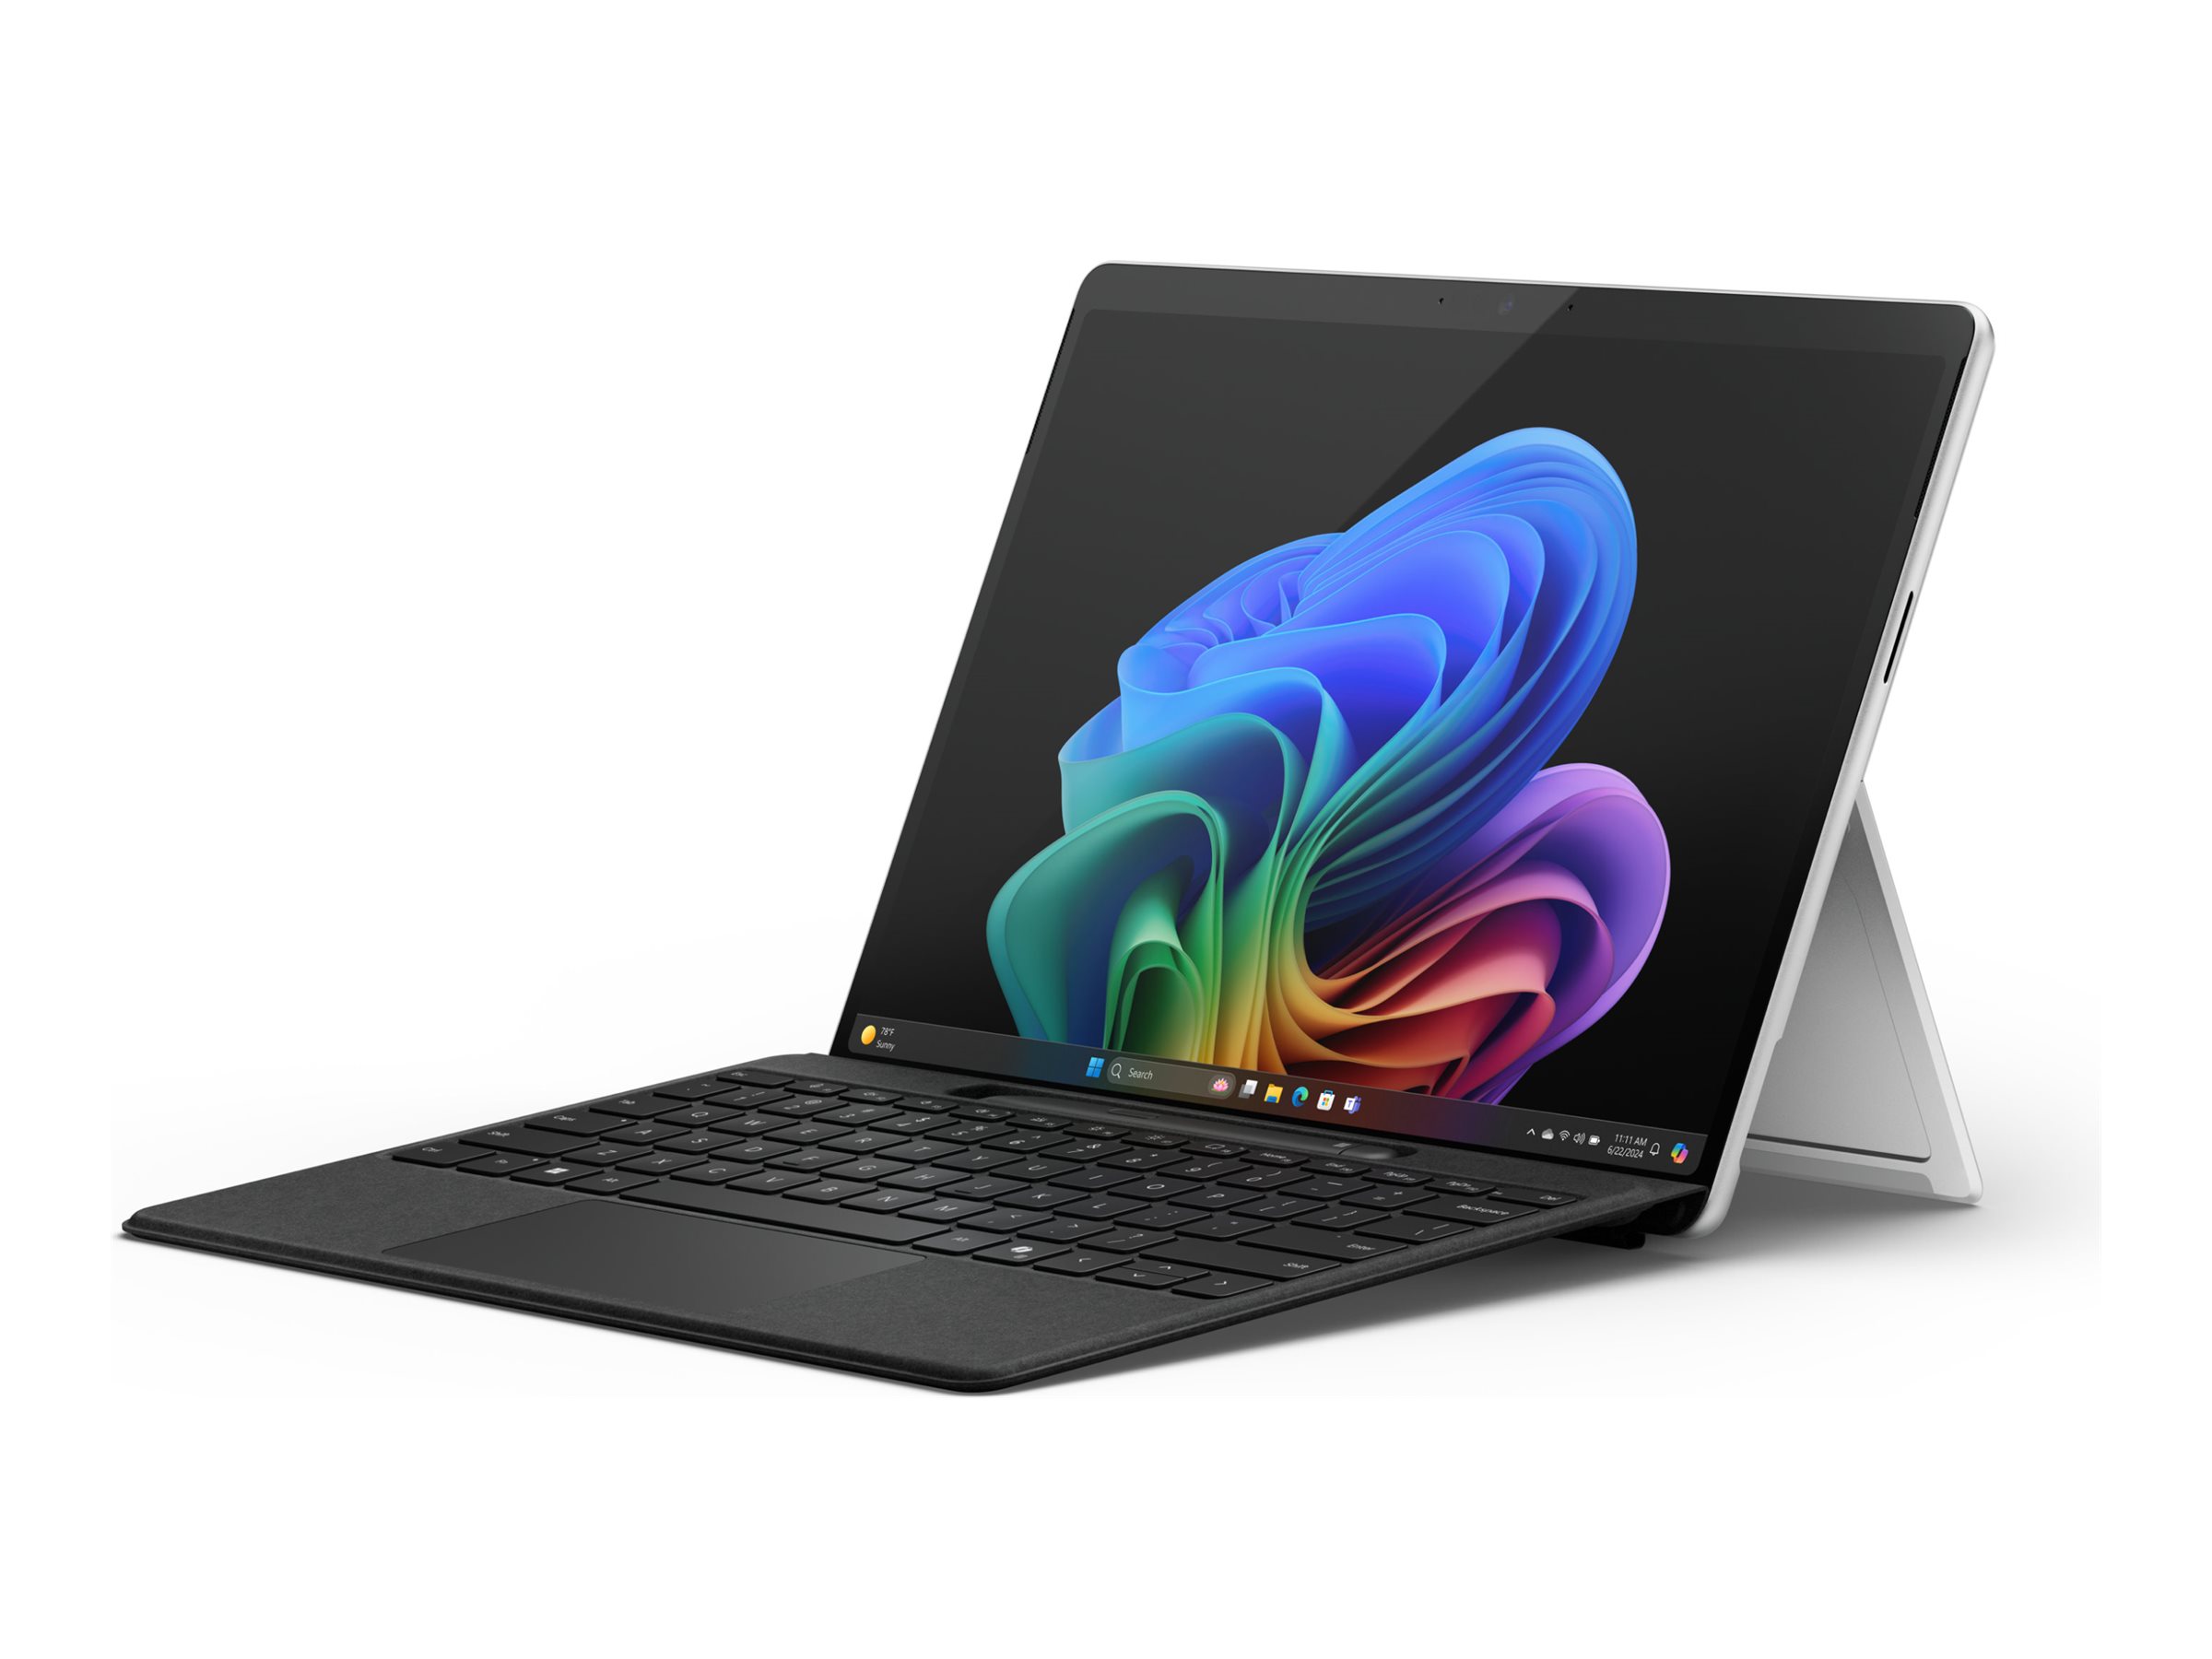 Microsoft Surface Pro Copilot+ PC for Business - 11th Edition - tablette - Snapdragon X Elite - X1E-80-100 / jusqu'à 4 GHz - Win 11 Pro - Qualcomm Adreno - 16 Go RAM - 1 To SSD - 13" OLED écran tactile 2880 x 1920 @ 120 Hz - IEEE 802.11b, IEEE 802.11a, IEEE 802.11g, IEEE 802.11n, IEEE 802.11ac, NFC, IEEE 802.11be, IEEE 802.11ax (Wi-Fi 6), Bluetooth 5.4 - NFC, Wi-Fi 7, Bluetooth - platine - ZIP-00004 - Ordinateurs portables